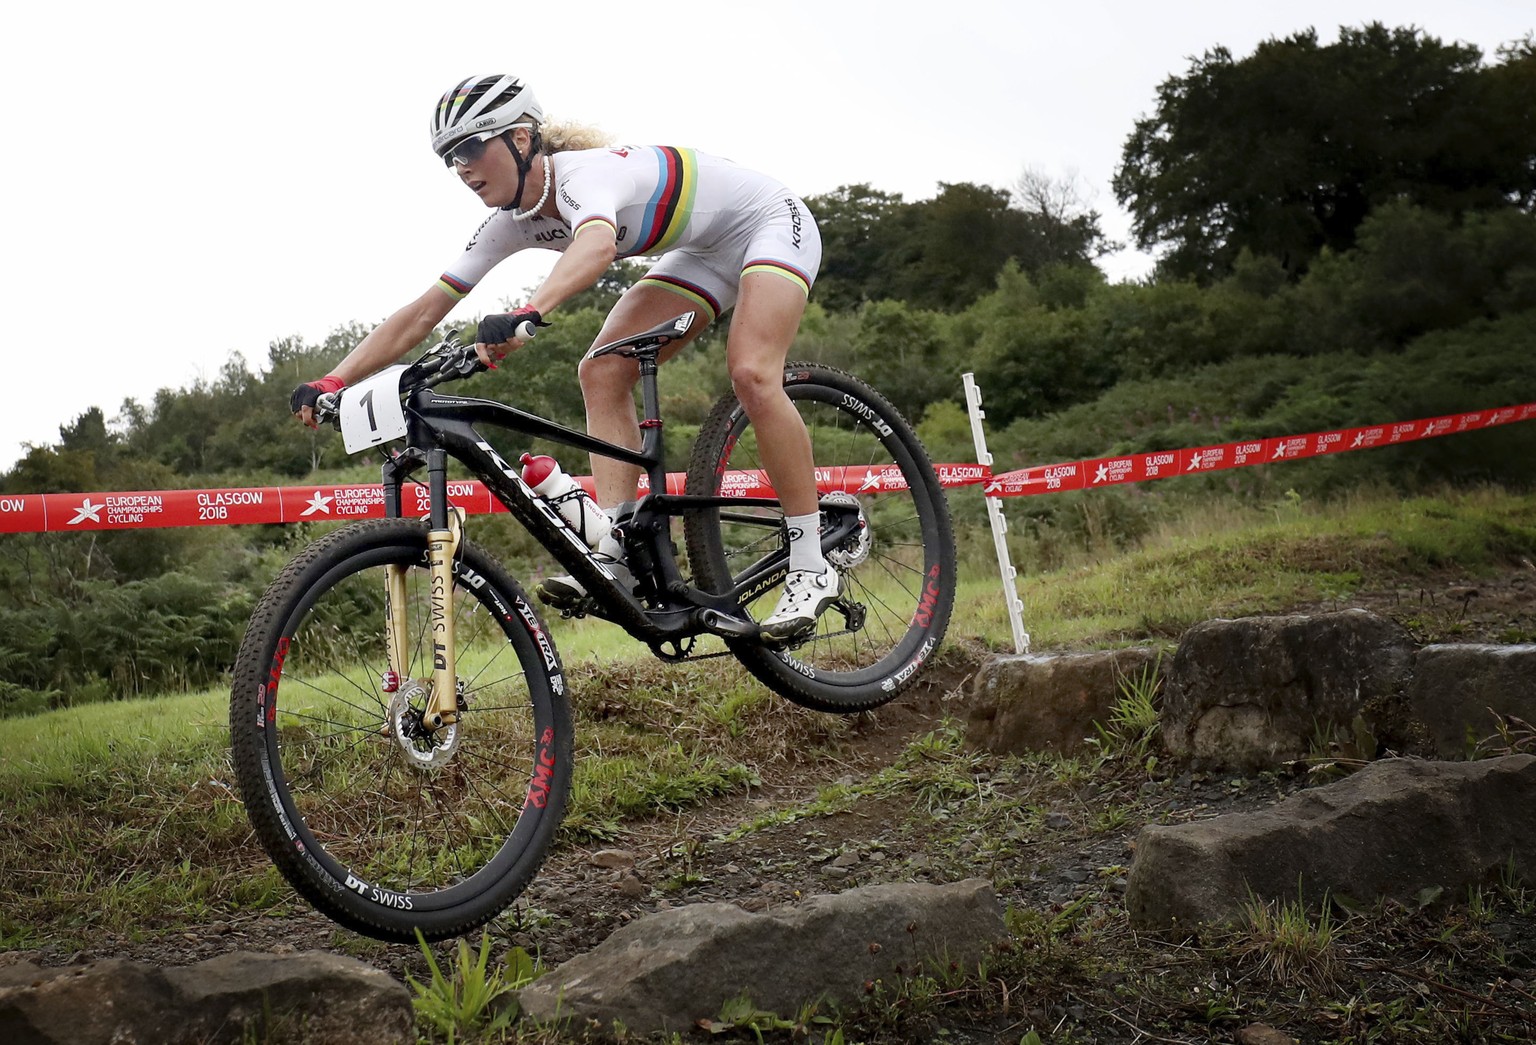 Switzerland&#039;s Jolanda Neff competes in the Women&#039;s Cross Country cycling during day six of the 2018 European Championships at the Cathkin Braes Mountain Bike Trails, Glasgow, Scotland Tuesda ...